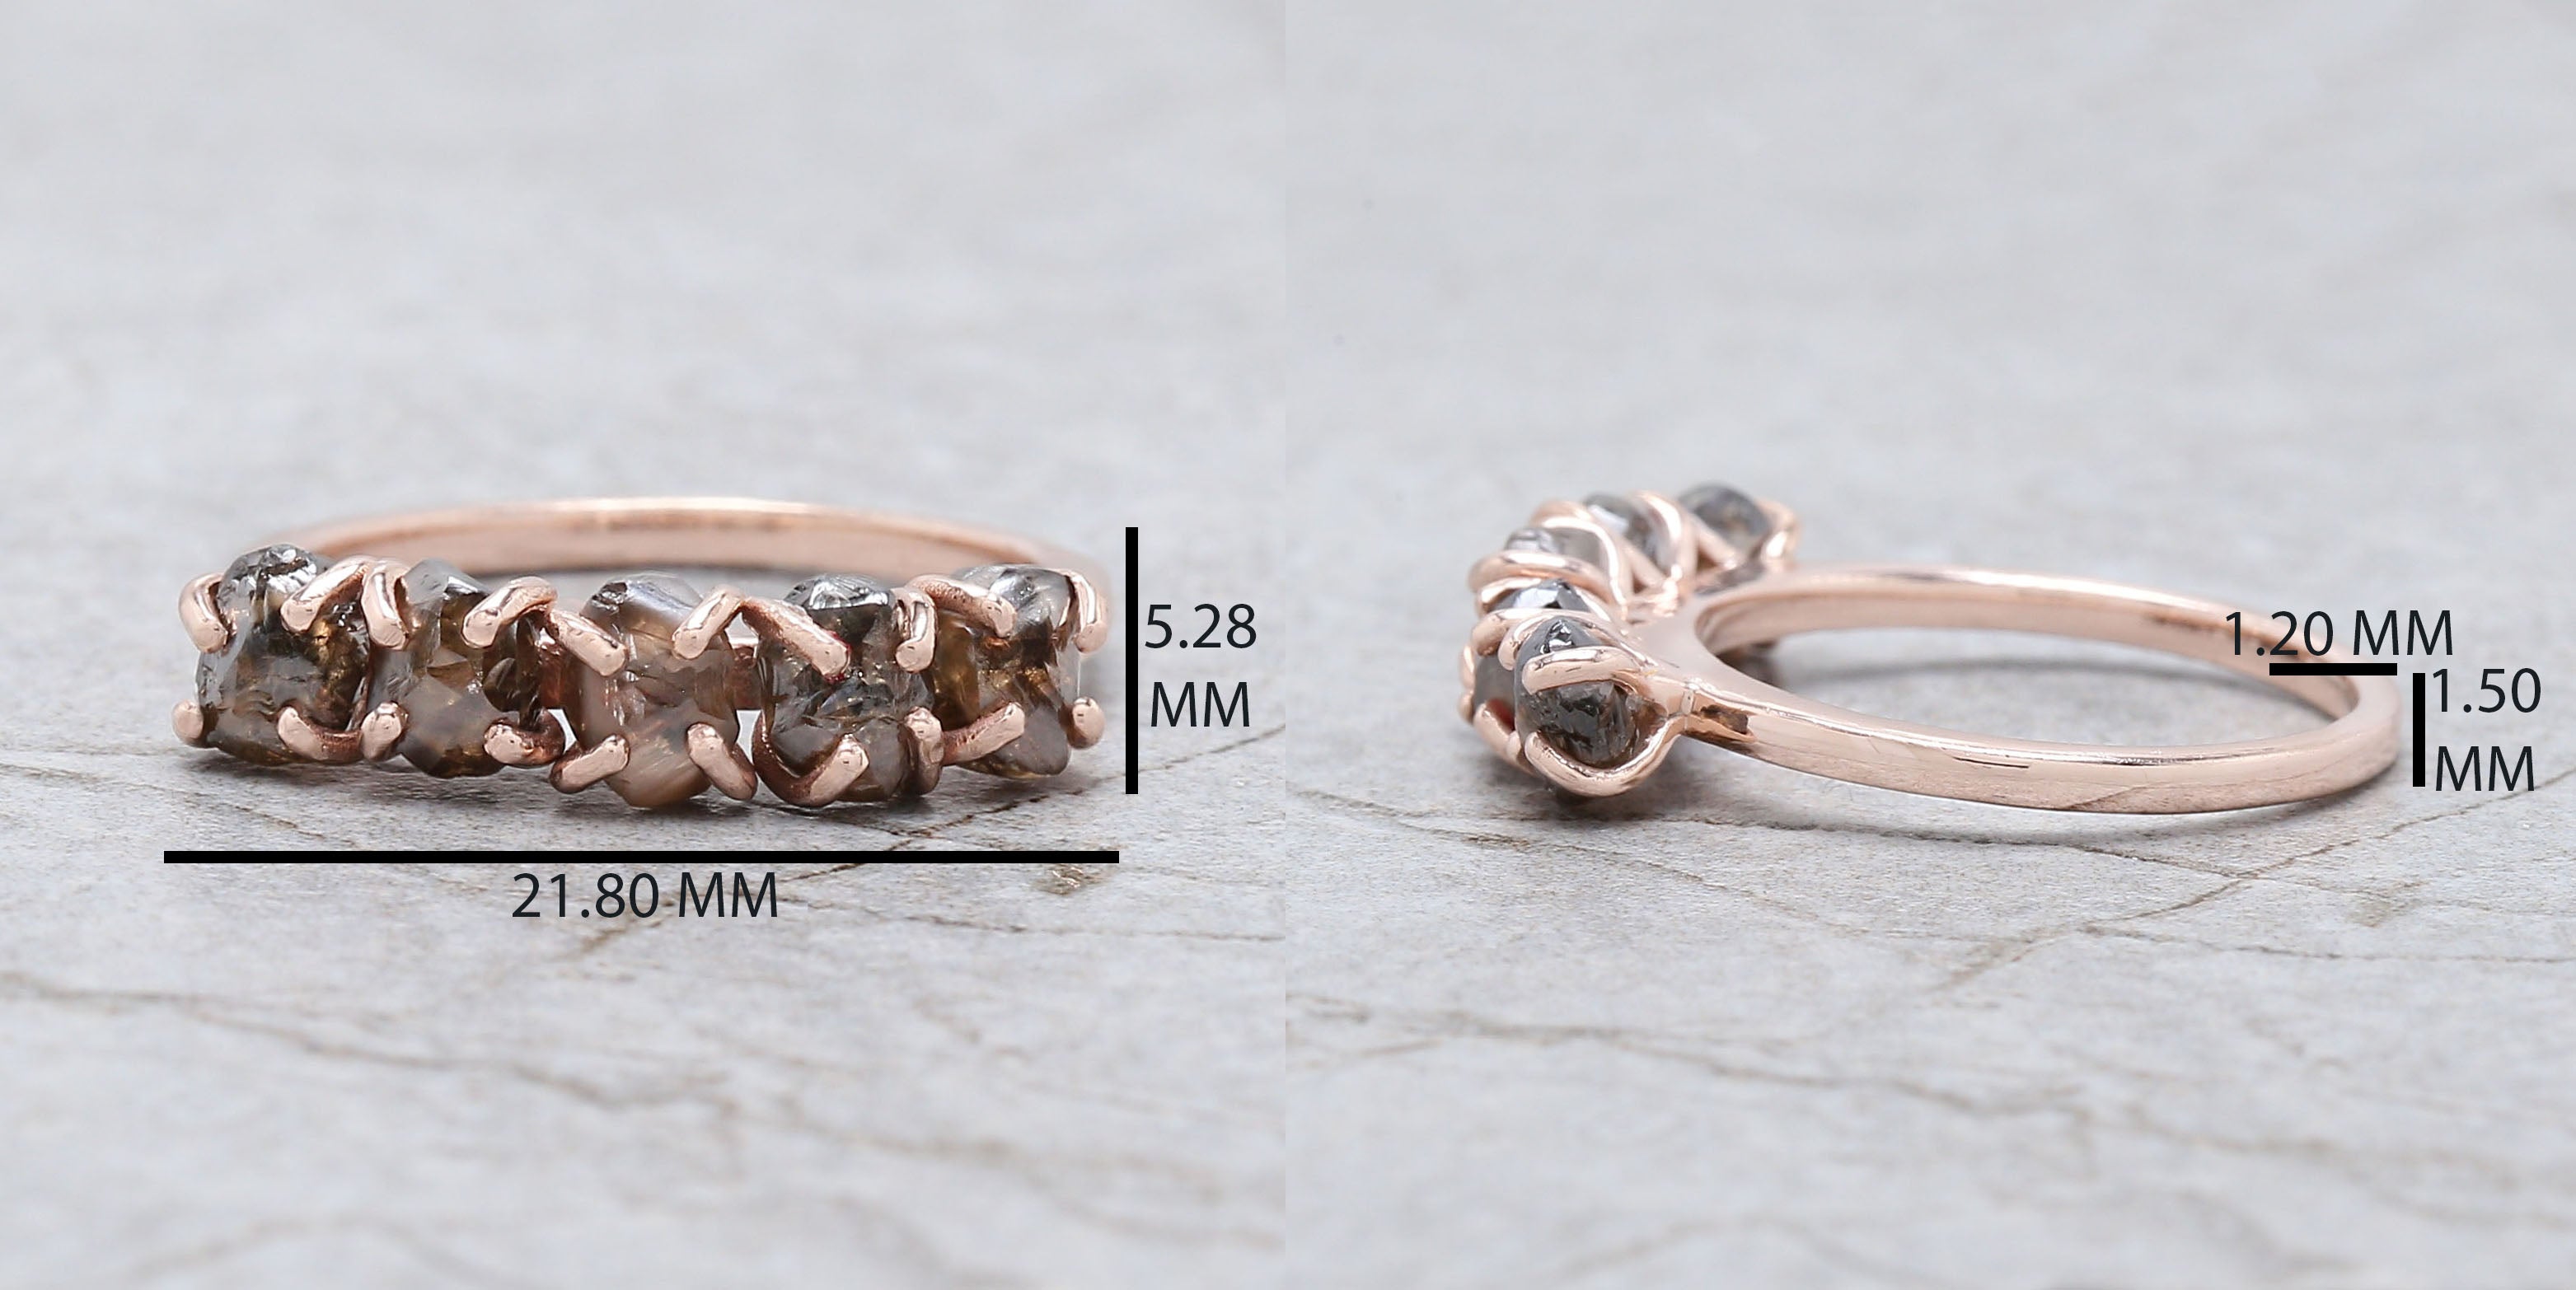 Rough Brown Color Diamond Ring 2.44 Ct 5.00 MM Crystal Rough Diamond Ring 14K Solid Rose Gold Silver Engagement Ring Gift For Her QL7971